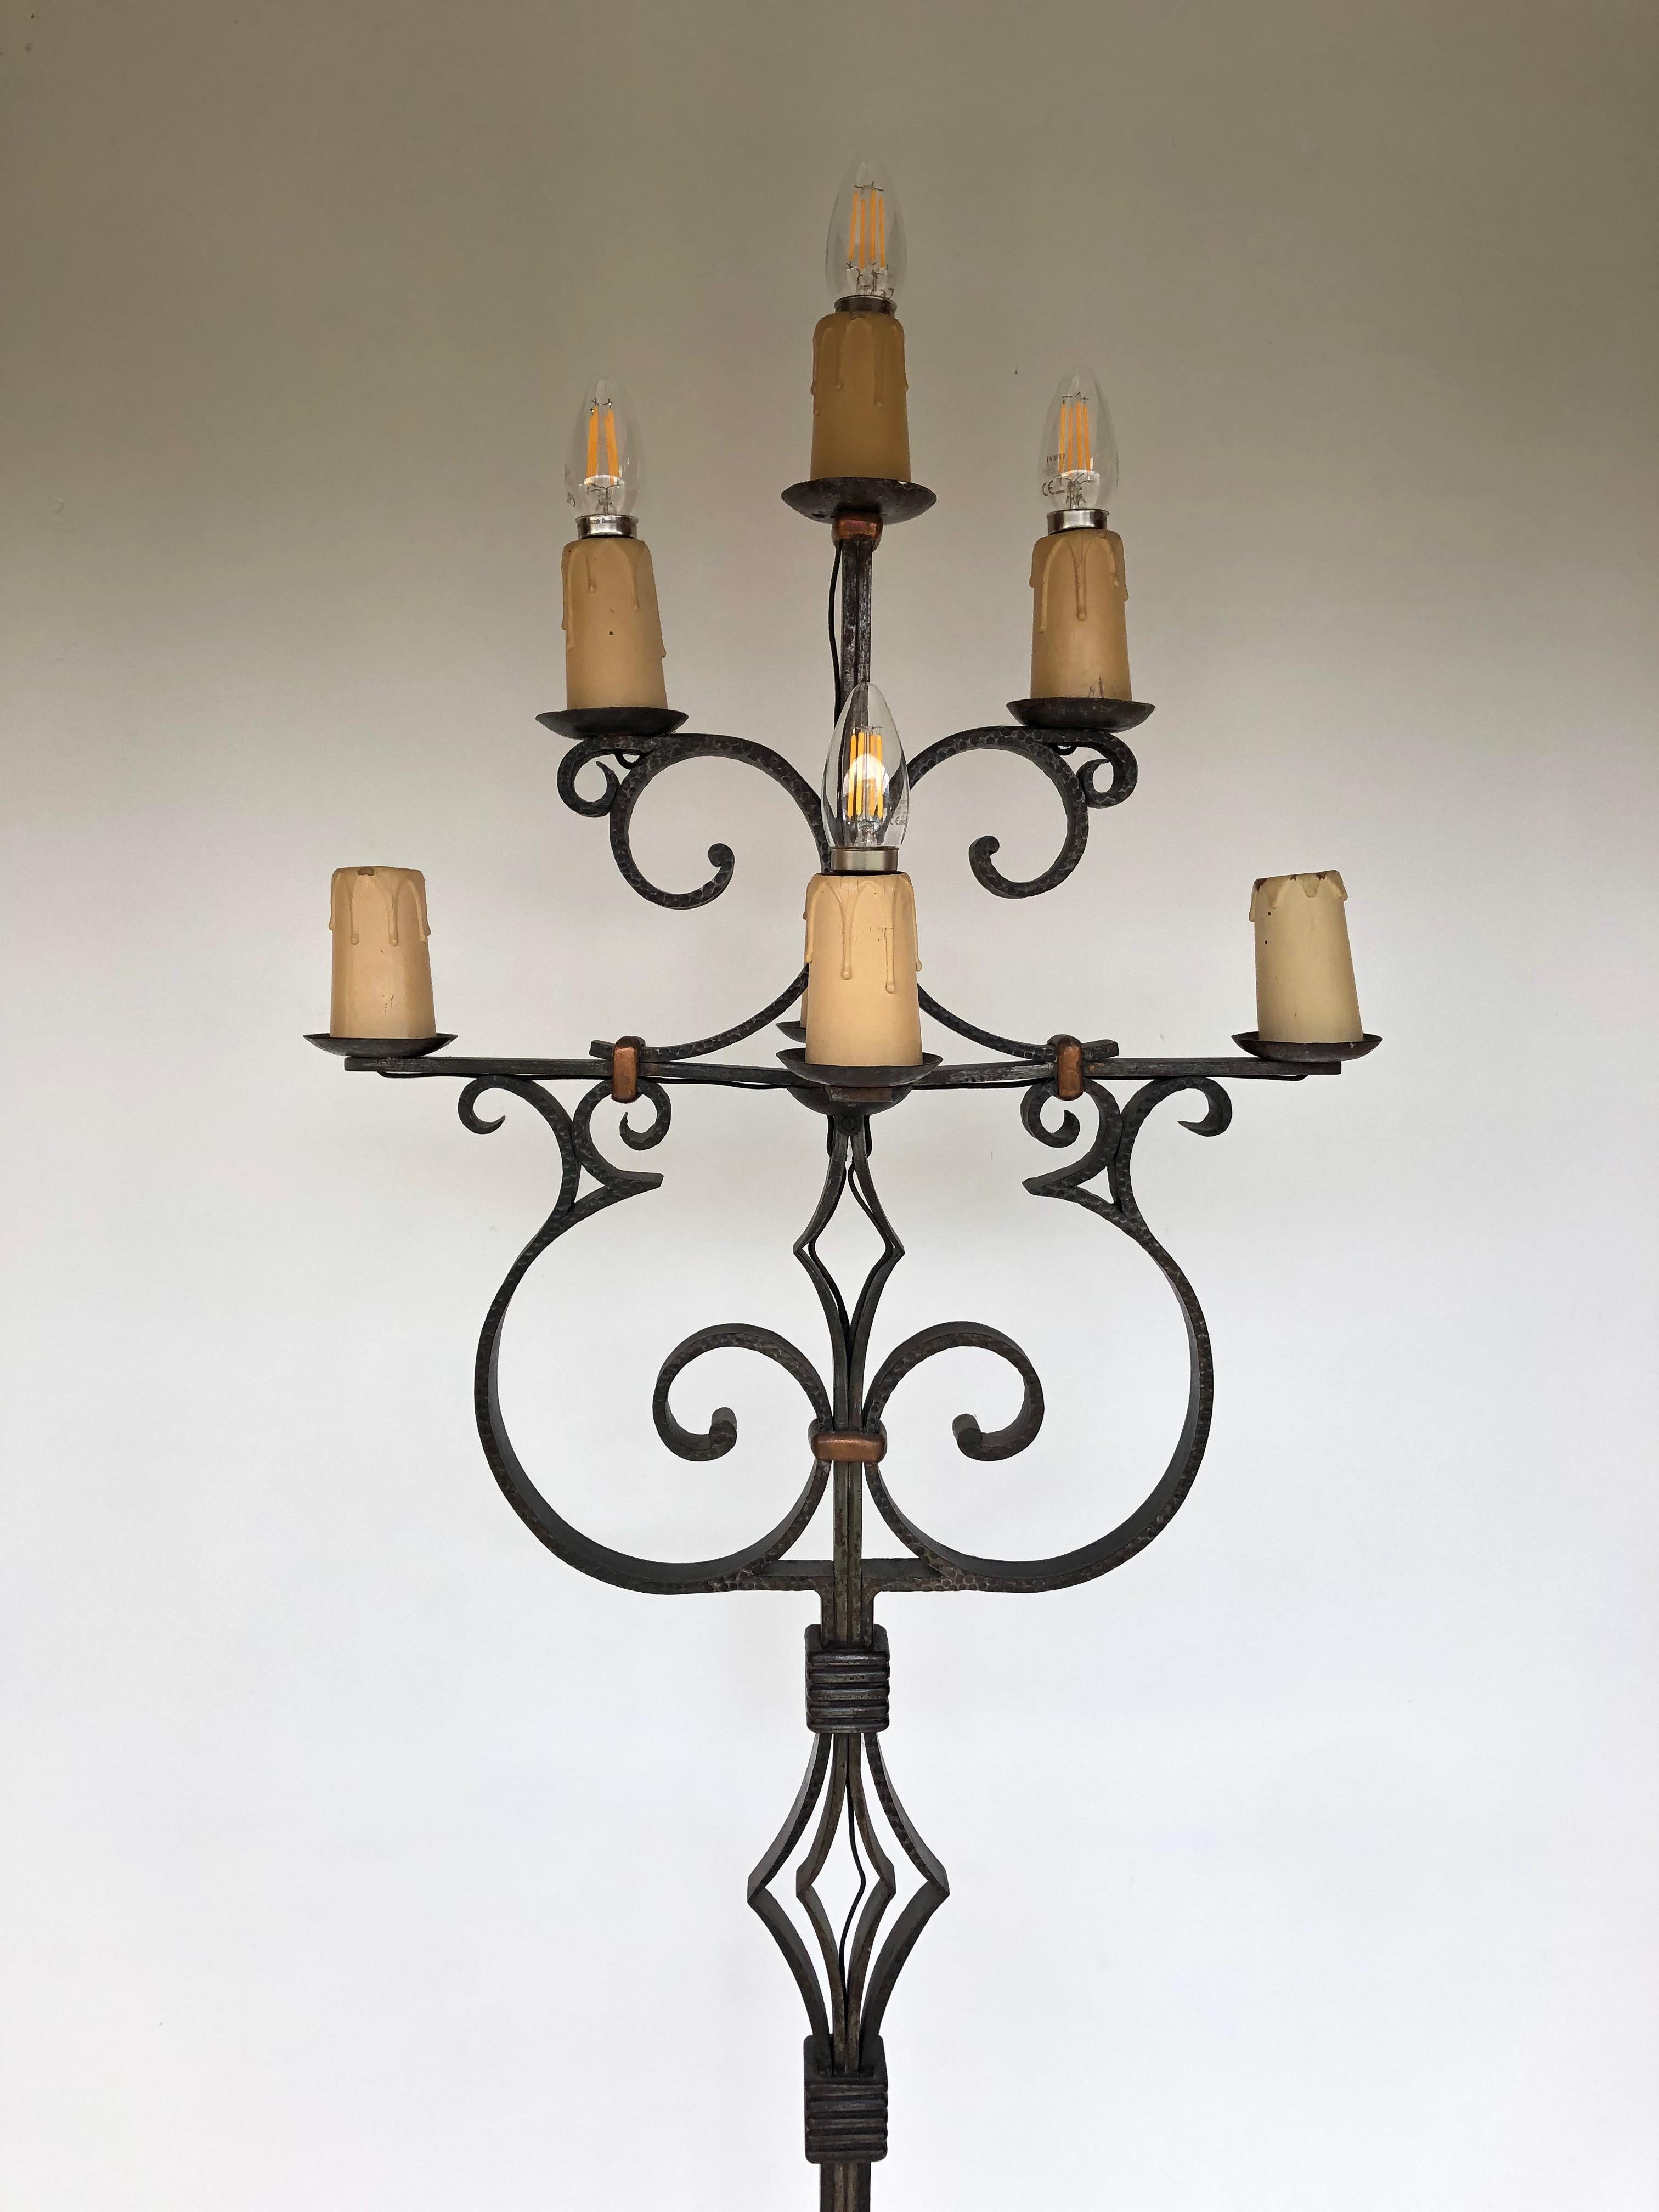 Zadounaisky Art Deco floor lamp

Floor lamp circa 1930 in wrought iron with 7 branches and 7 LED bulbs. Finely hammered, electrified. In perfect condition.
Total height: 171 cm
Base: 44cm x 44cm
Length: 48cm
Width: 27cm
Weight: 20 Kg

you